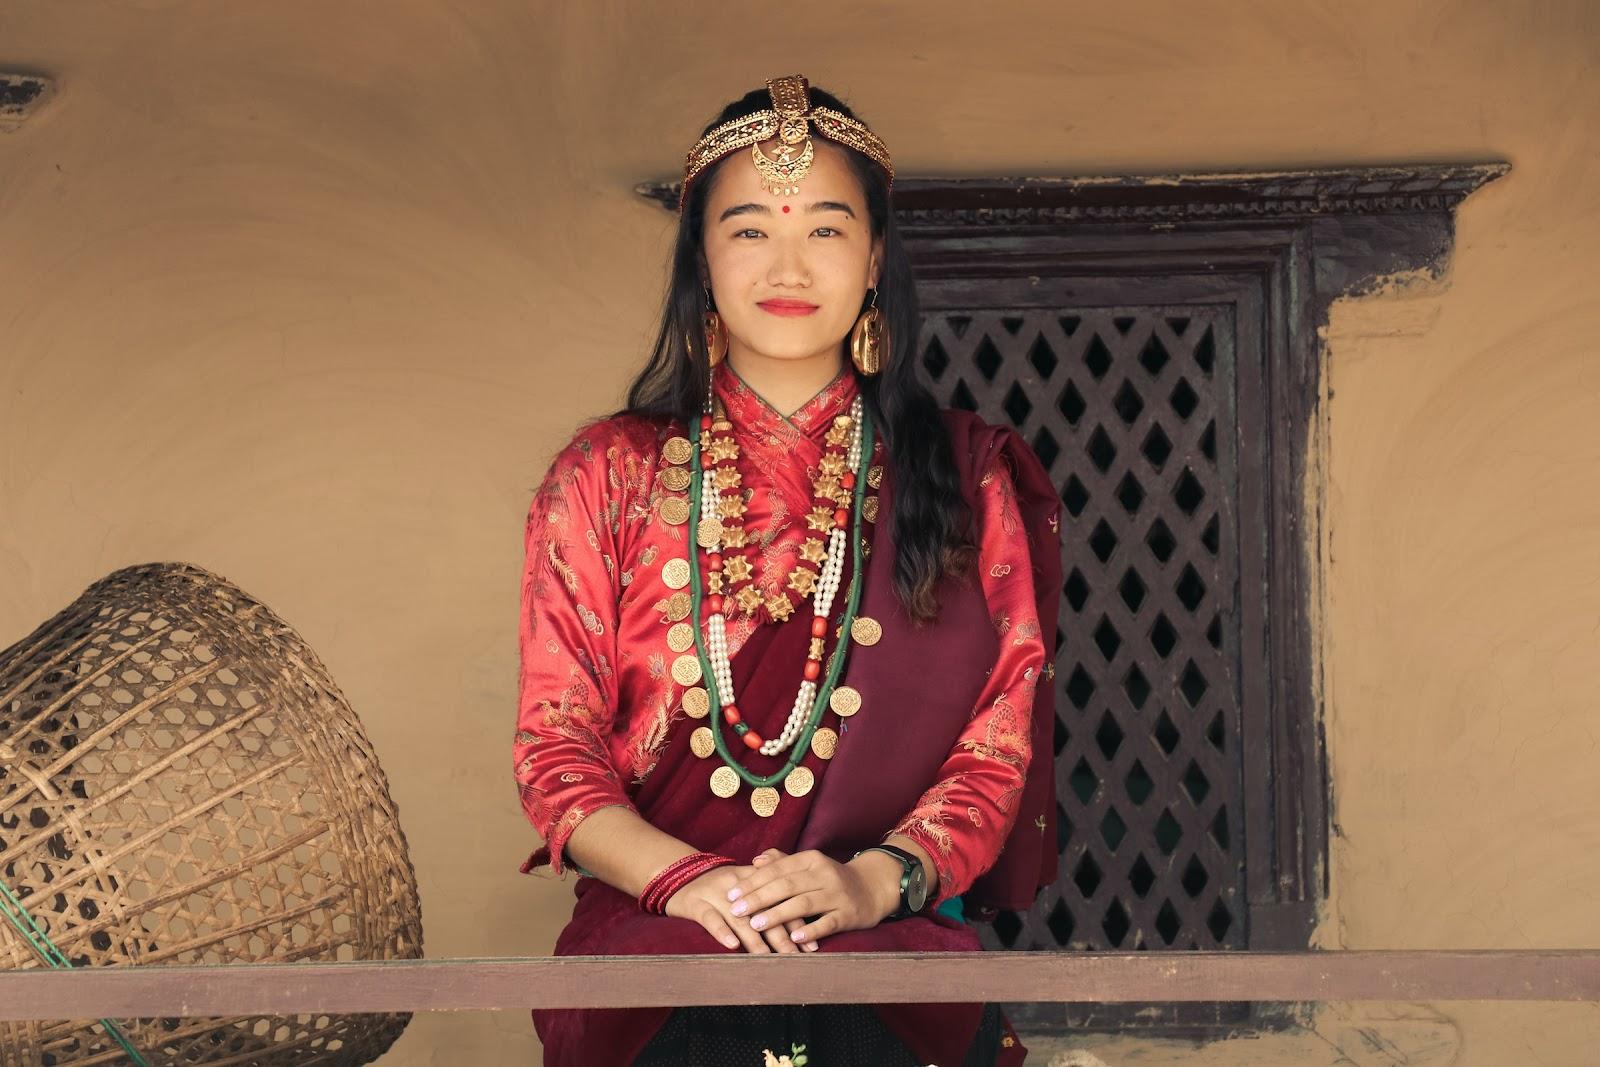 A Nepalese woman wearing traditional clothes and accessories.